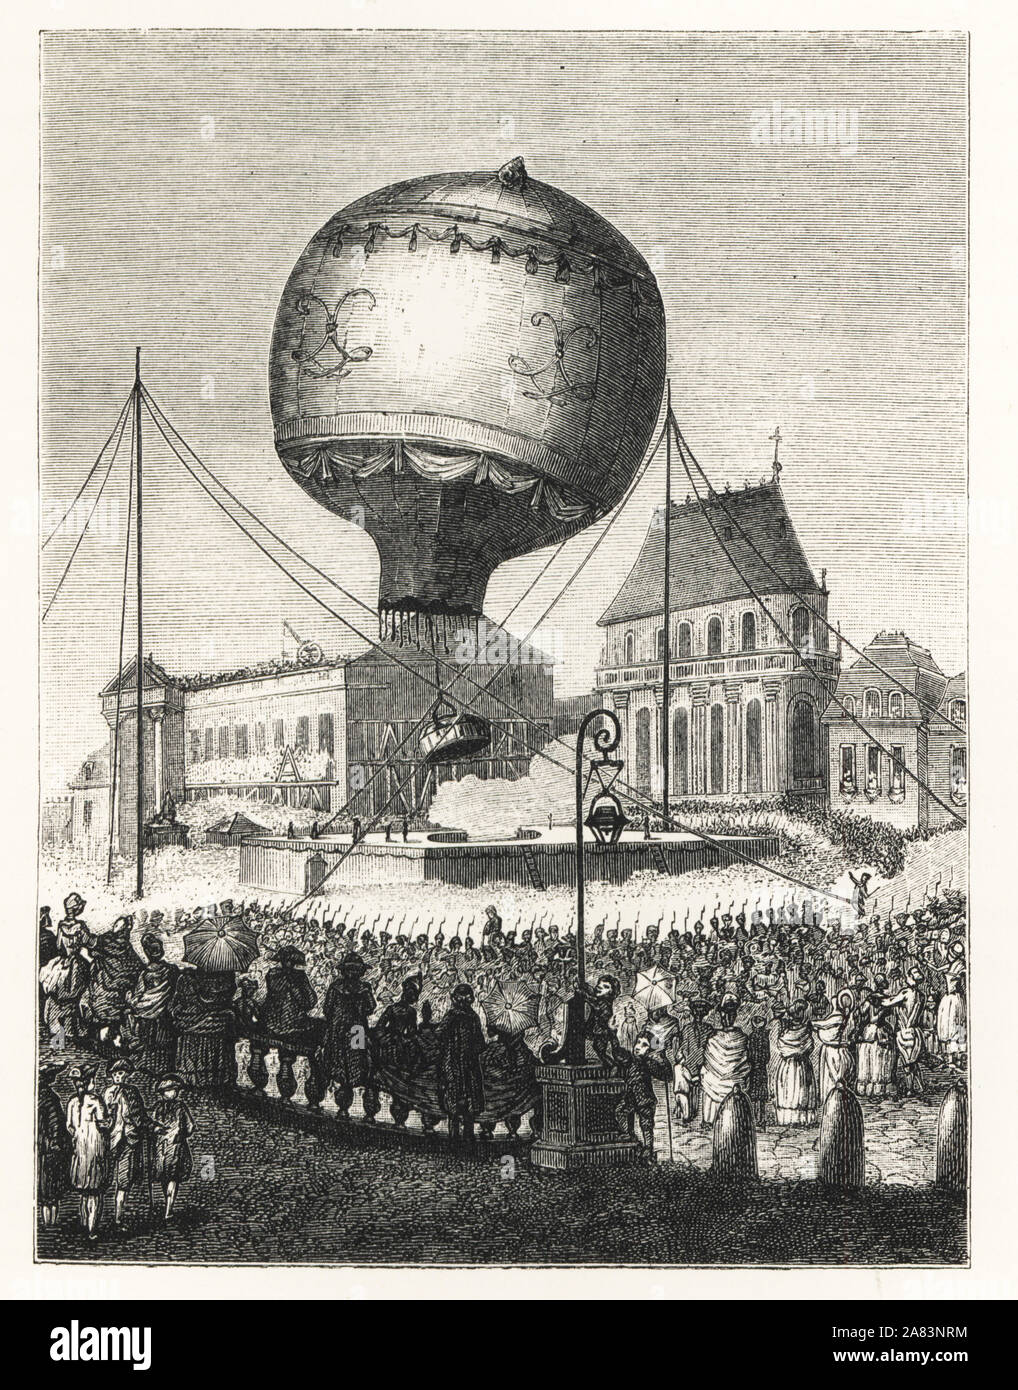 The Montgolfier brothers' balloon launch from Versailles in the presence of the king, September 1783. Joseph-Michel Montgolfier and Jacques-Etienne Montgolfier.  Lithograph from Paul Lacroix' The Eighteenth Century: Its Institutions, Customs, and Costumes, London, 1876. Stock Photo